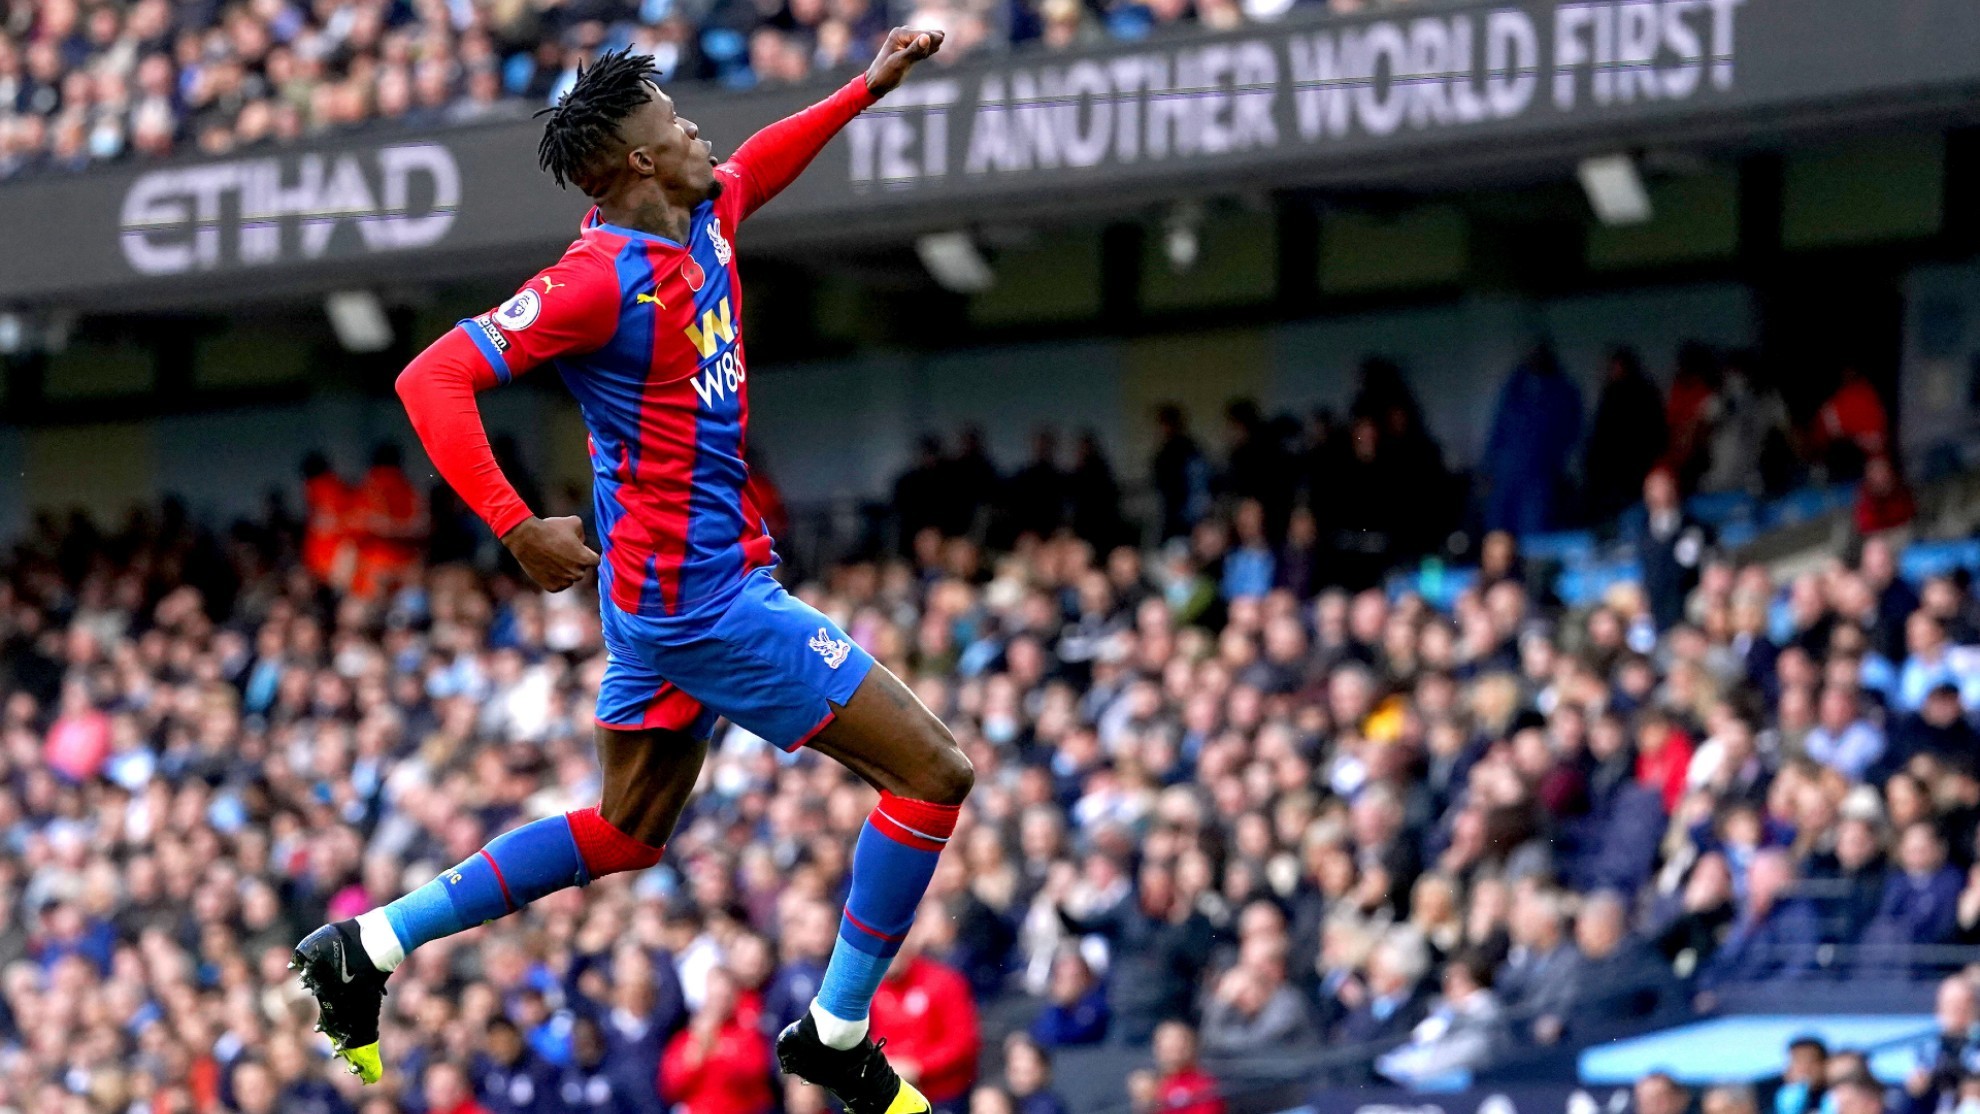 Wilfried Zaha celebrates scoring during the English Premier League soccer match between City and Crystal Palace